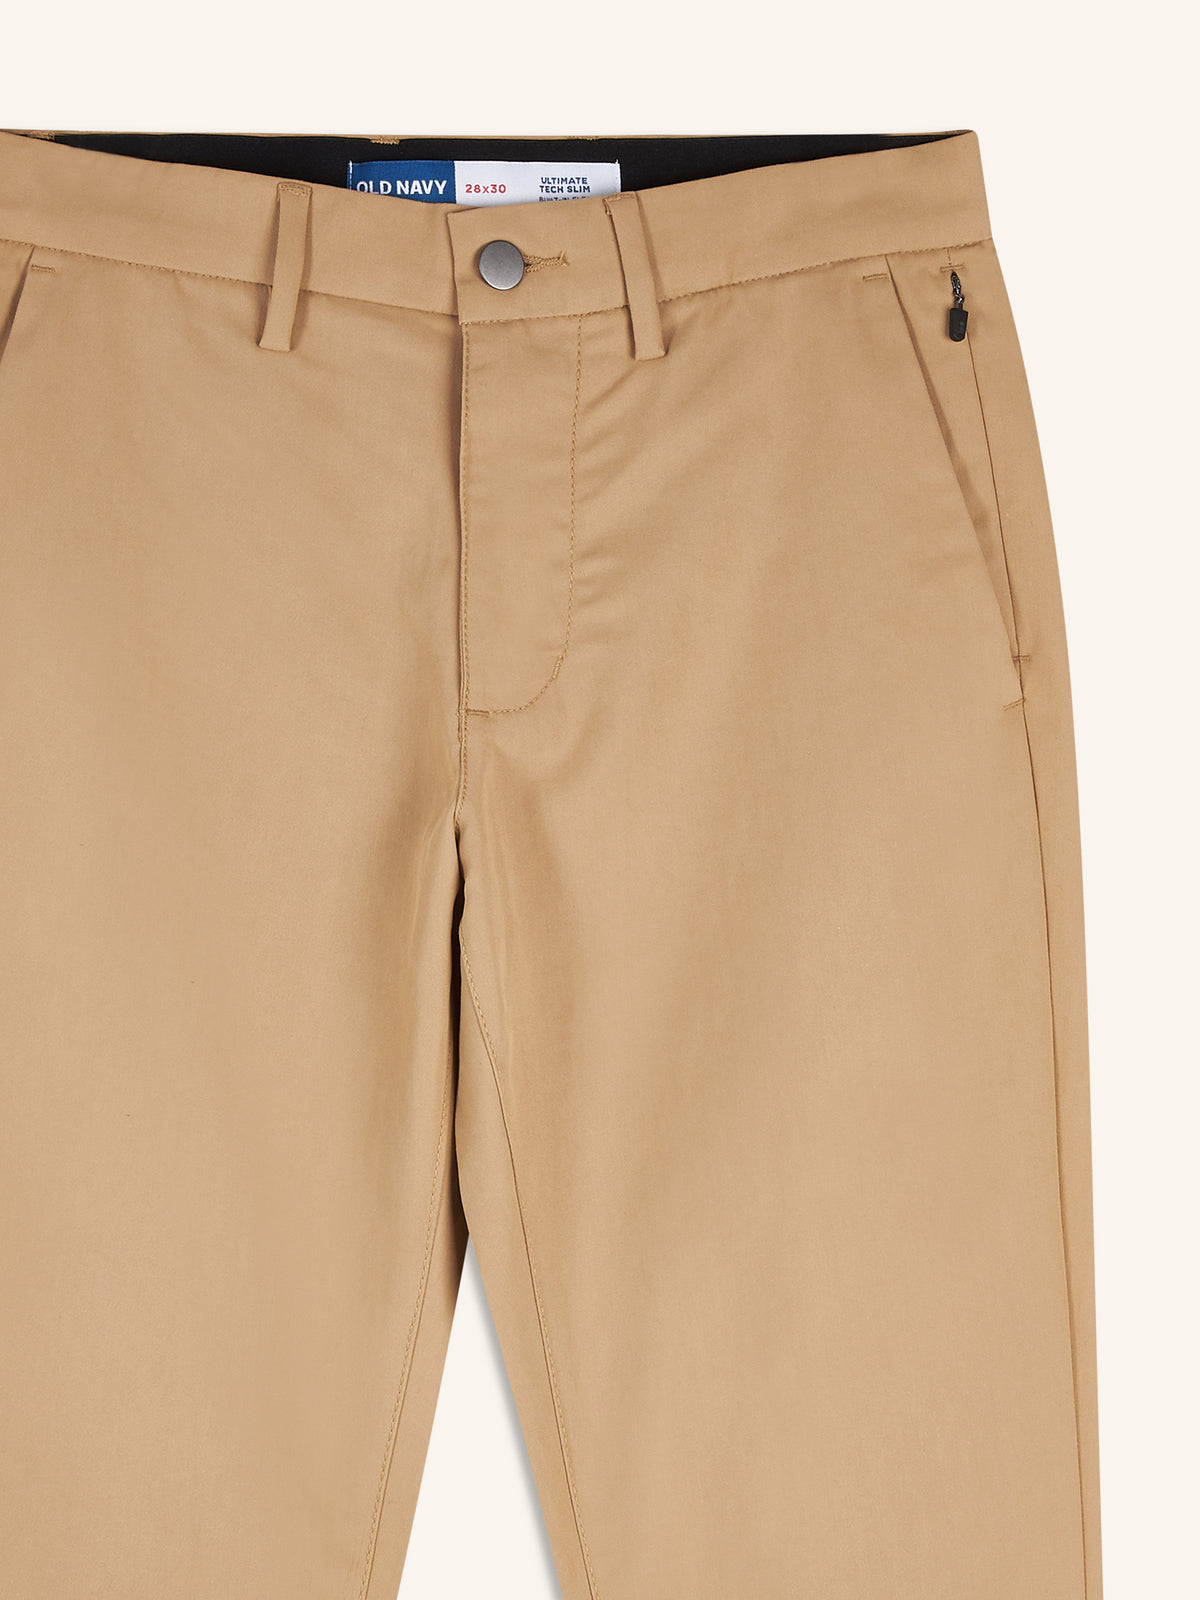 Slim Ultimate Built-In Flex Chino Pants for Men - Old Navy Philippines